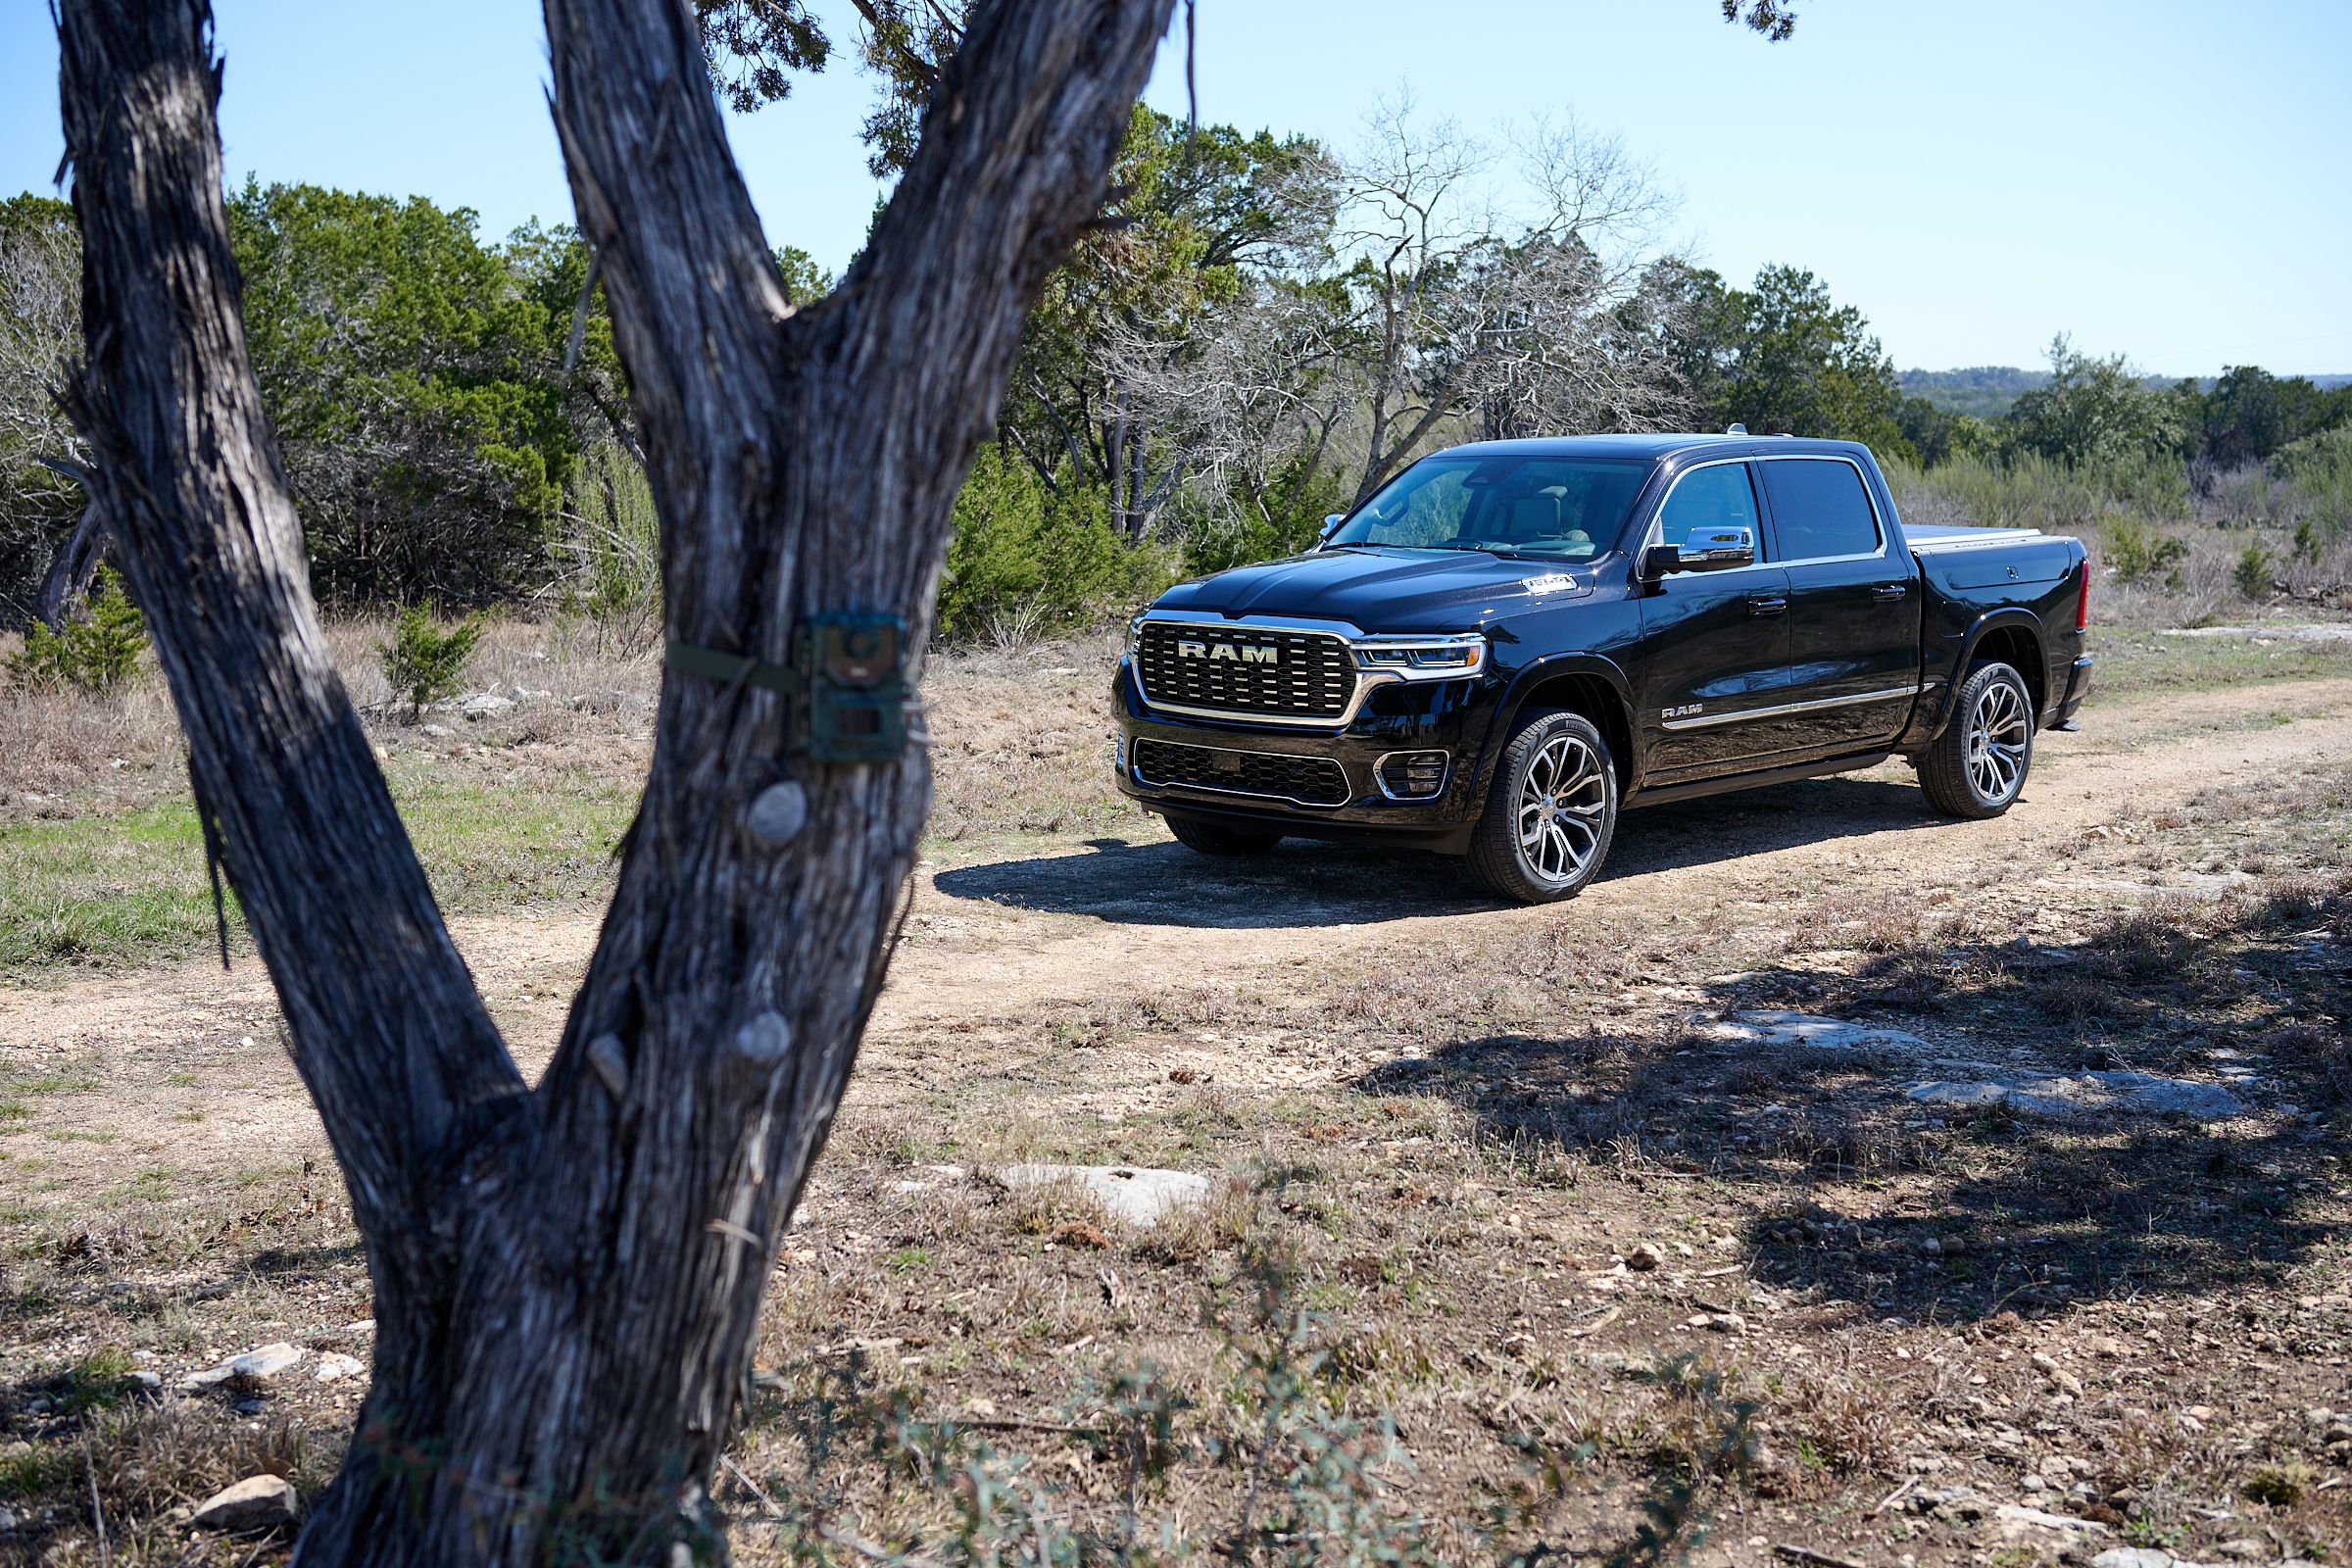 First Drive: 2025 Ram 1500 loses Hemi V8, takes a play from Genesis